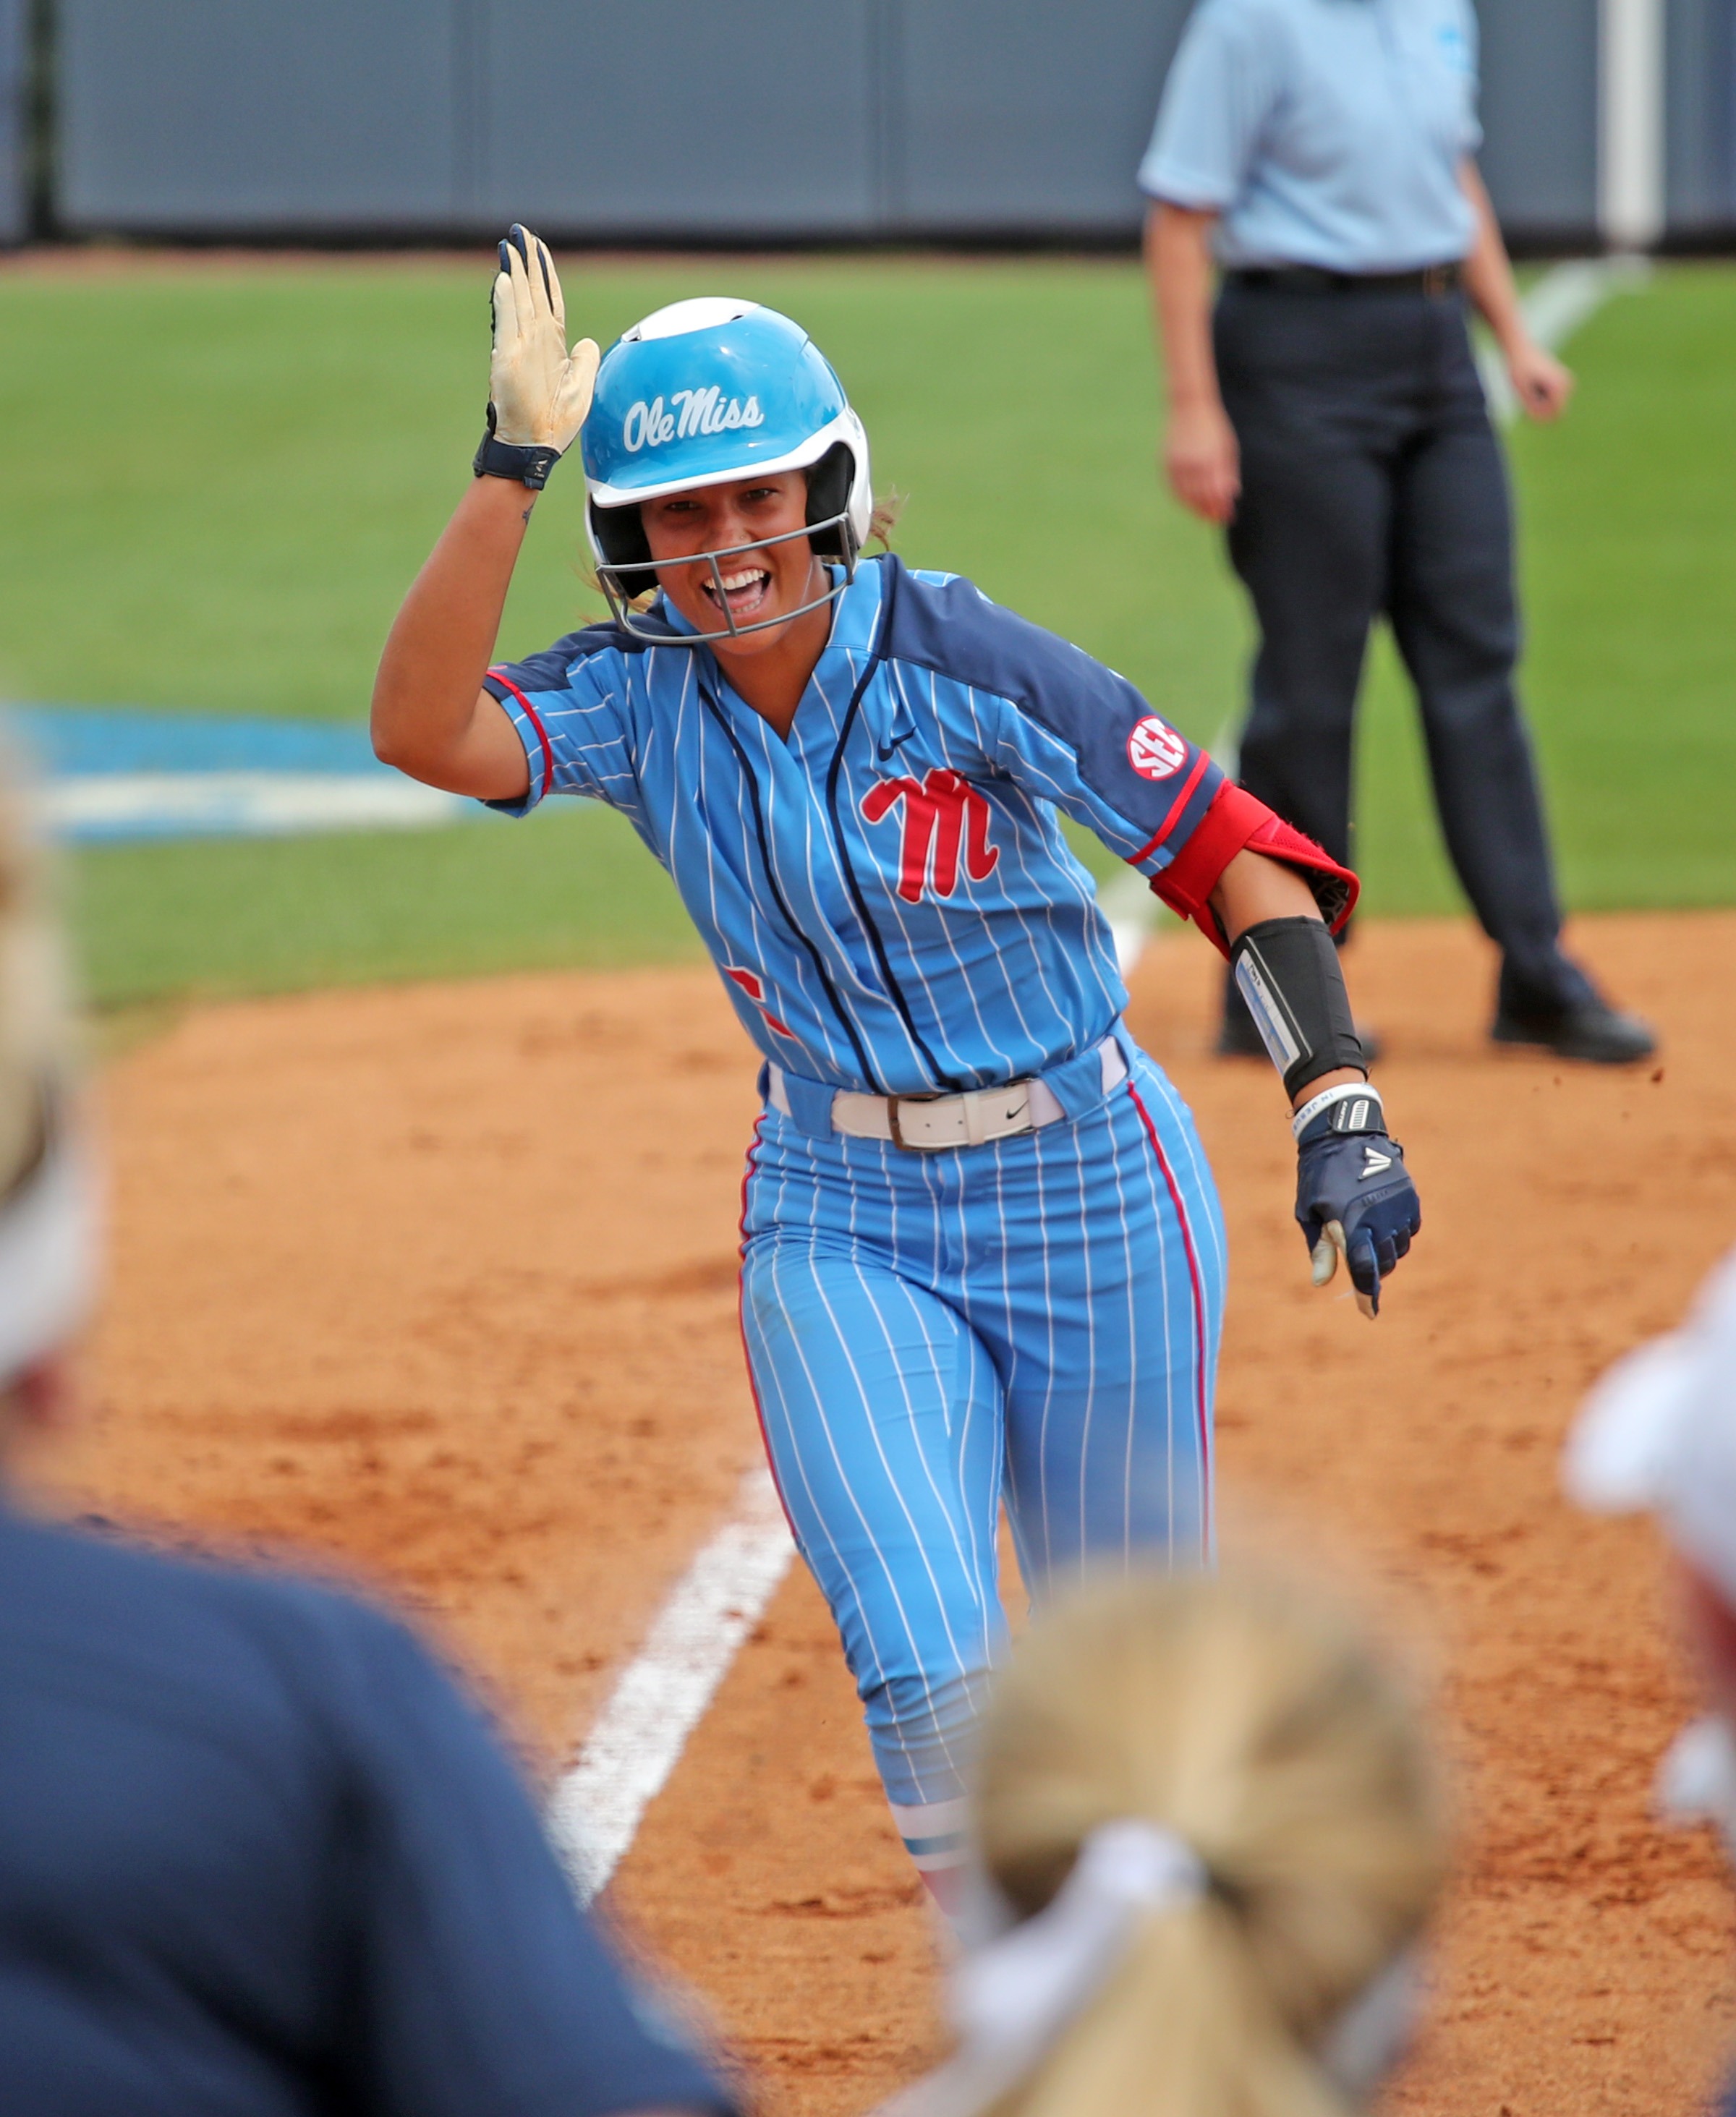 Ole Miss softball looking for series win in Tucson Super Regional The